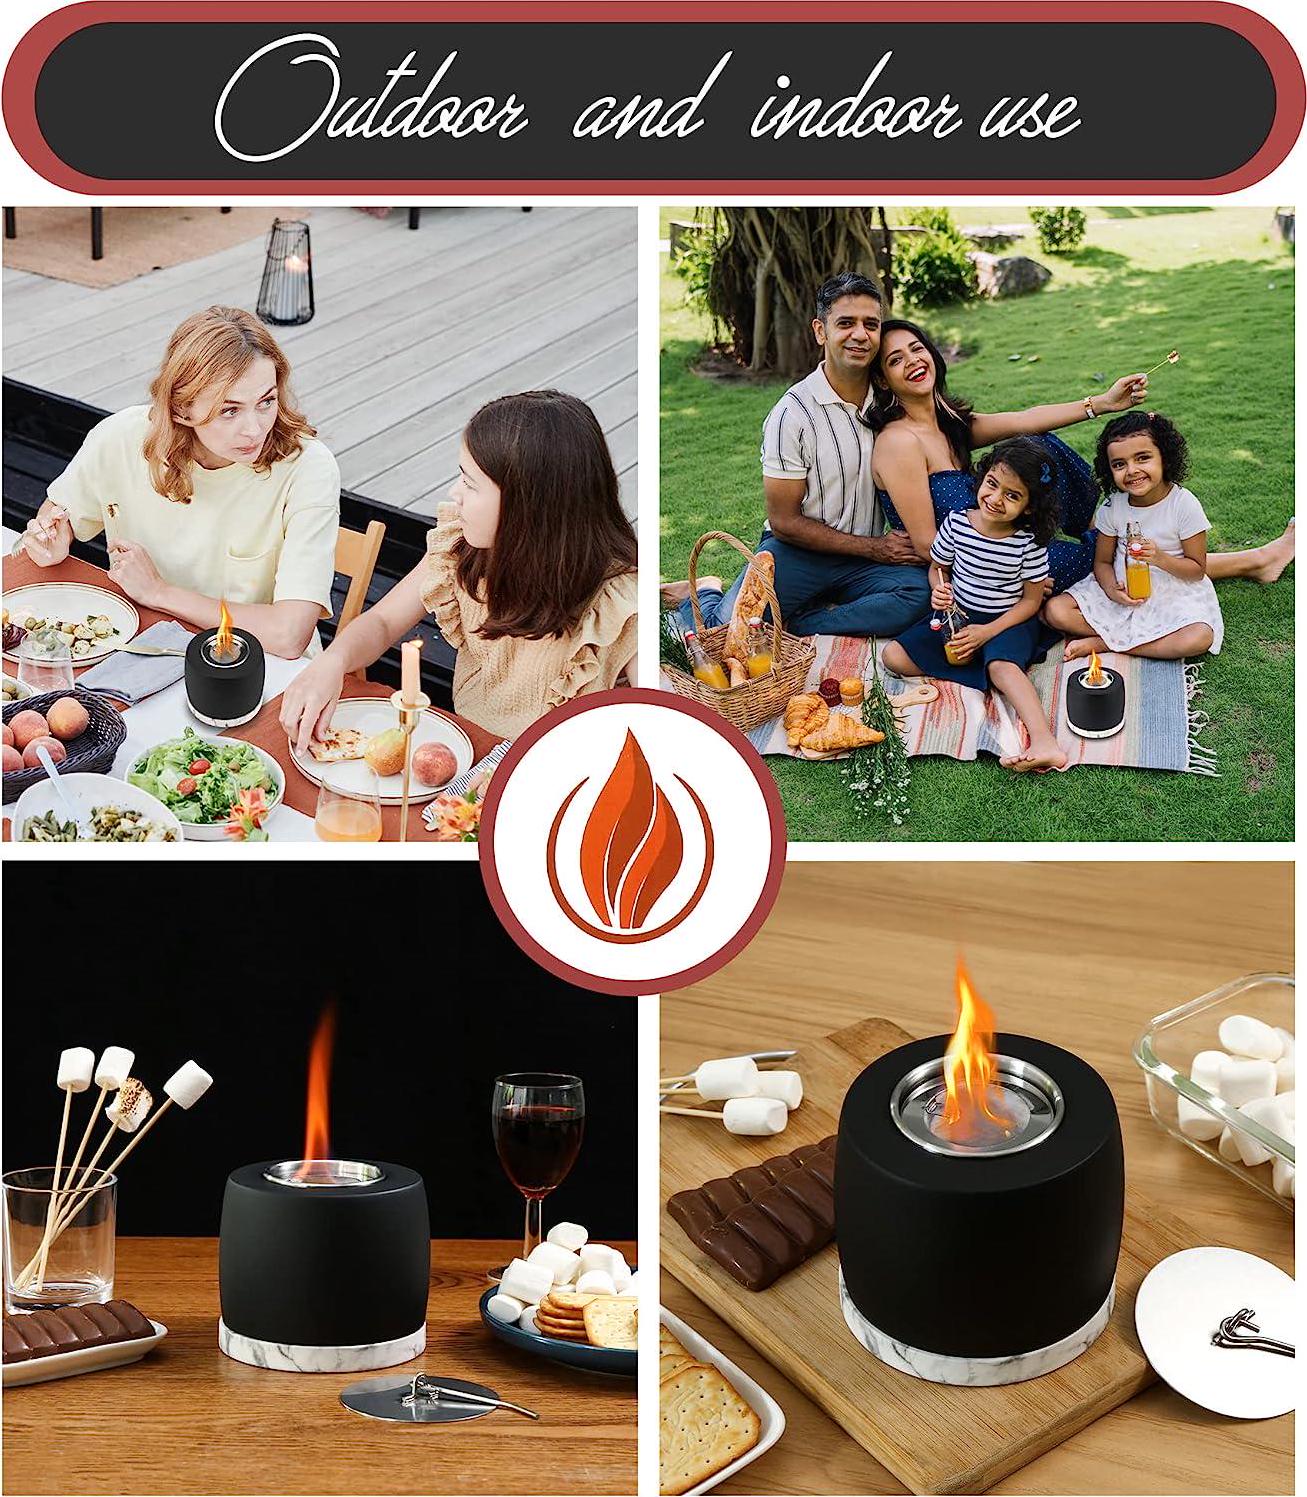 Tabletop Fire Pit - Durable and Stylish Design Mini Personal Table top Fireplace, Fire Bowl, Perfect for Indoor and Outdoor Gatherings, Outdoor Portable Tabletop Fire Pit